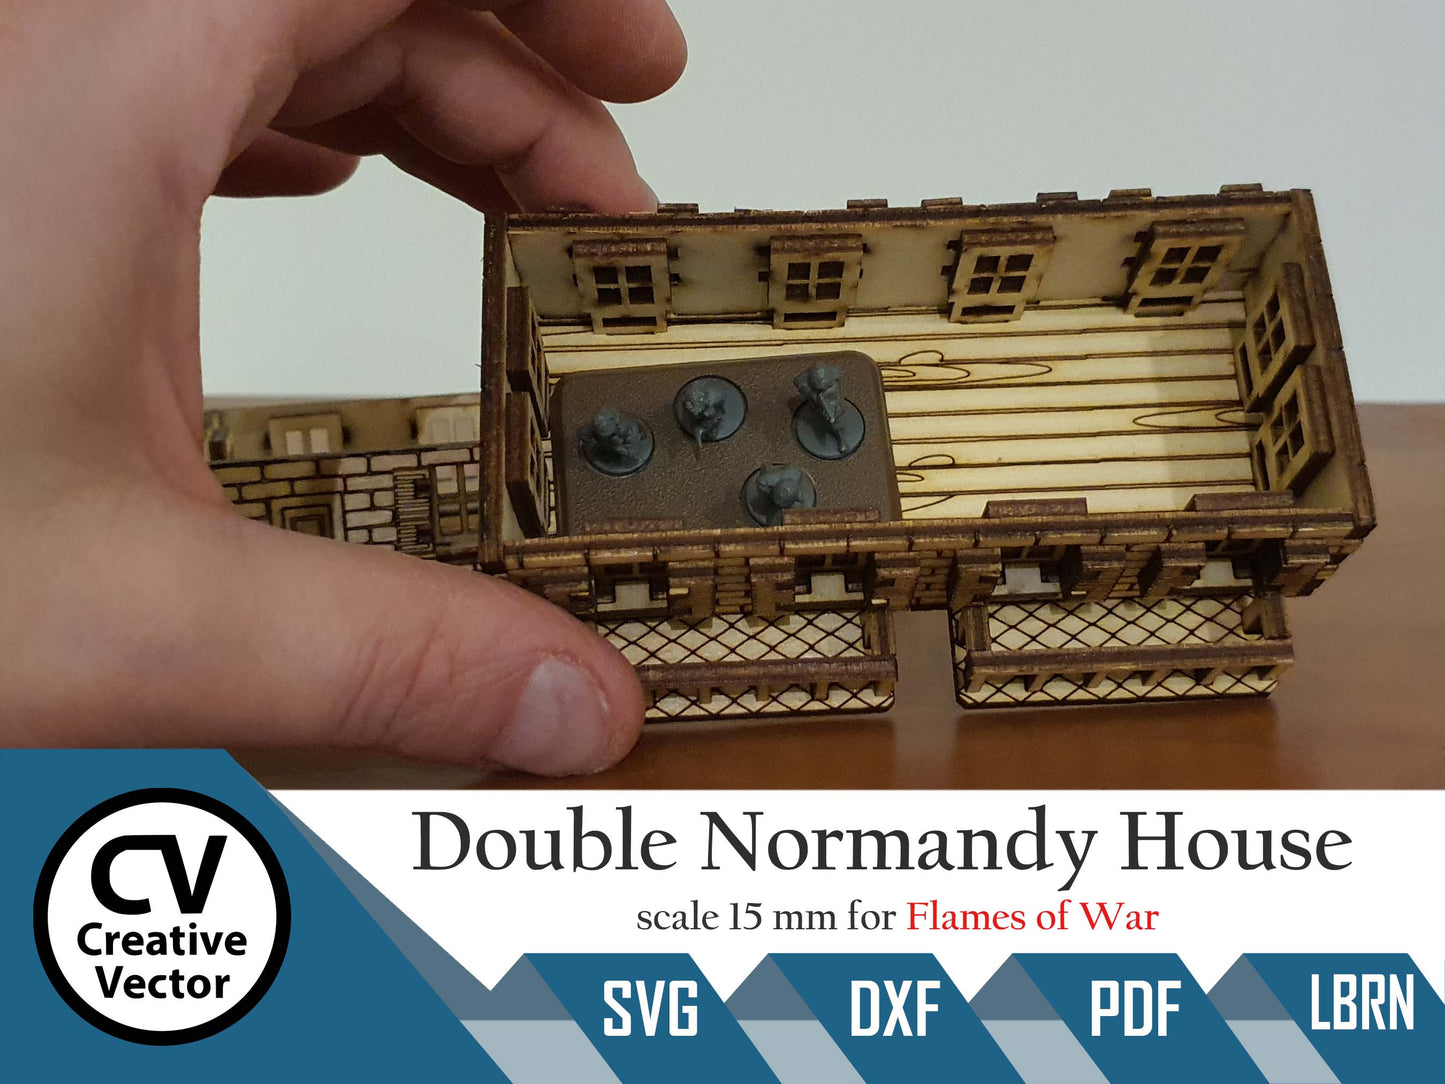 Double Normandy House with bacone in scale 15mm (1:100 / 1:87 / H0) for game Flames of War